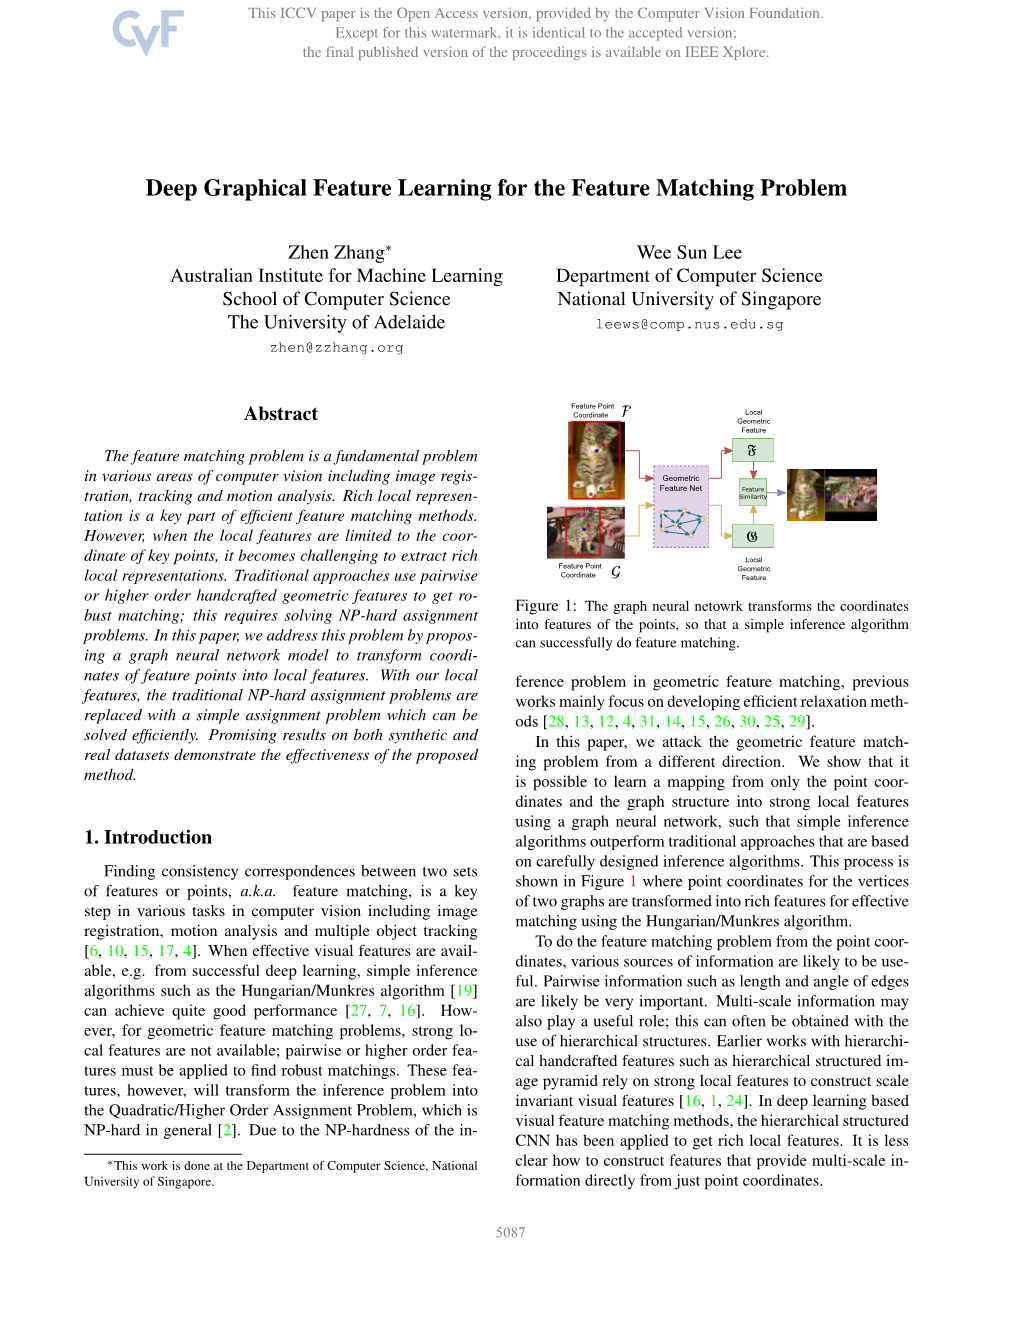 Deep Graphical Feature Learning for the Feature Matching Problem